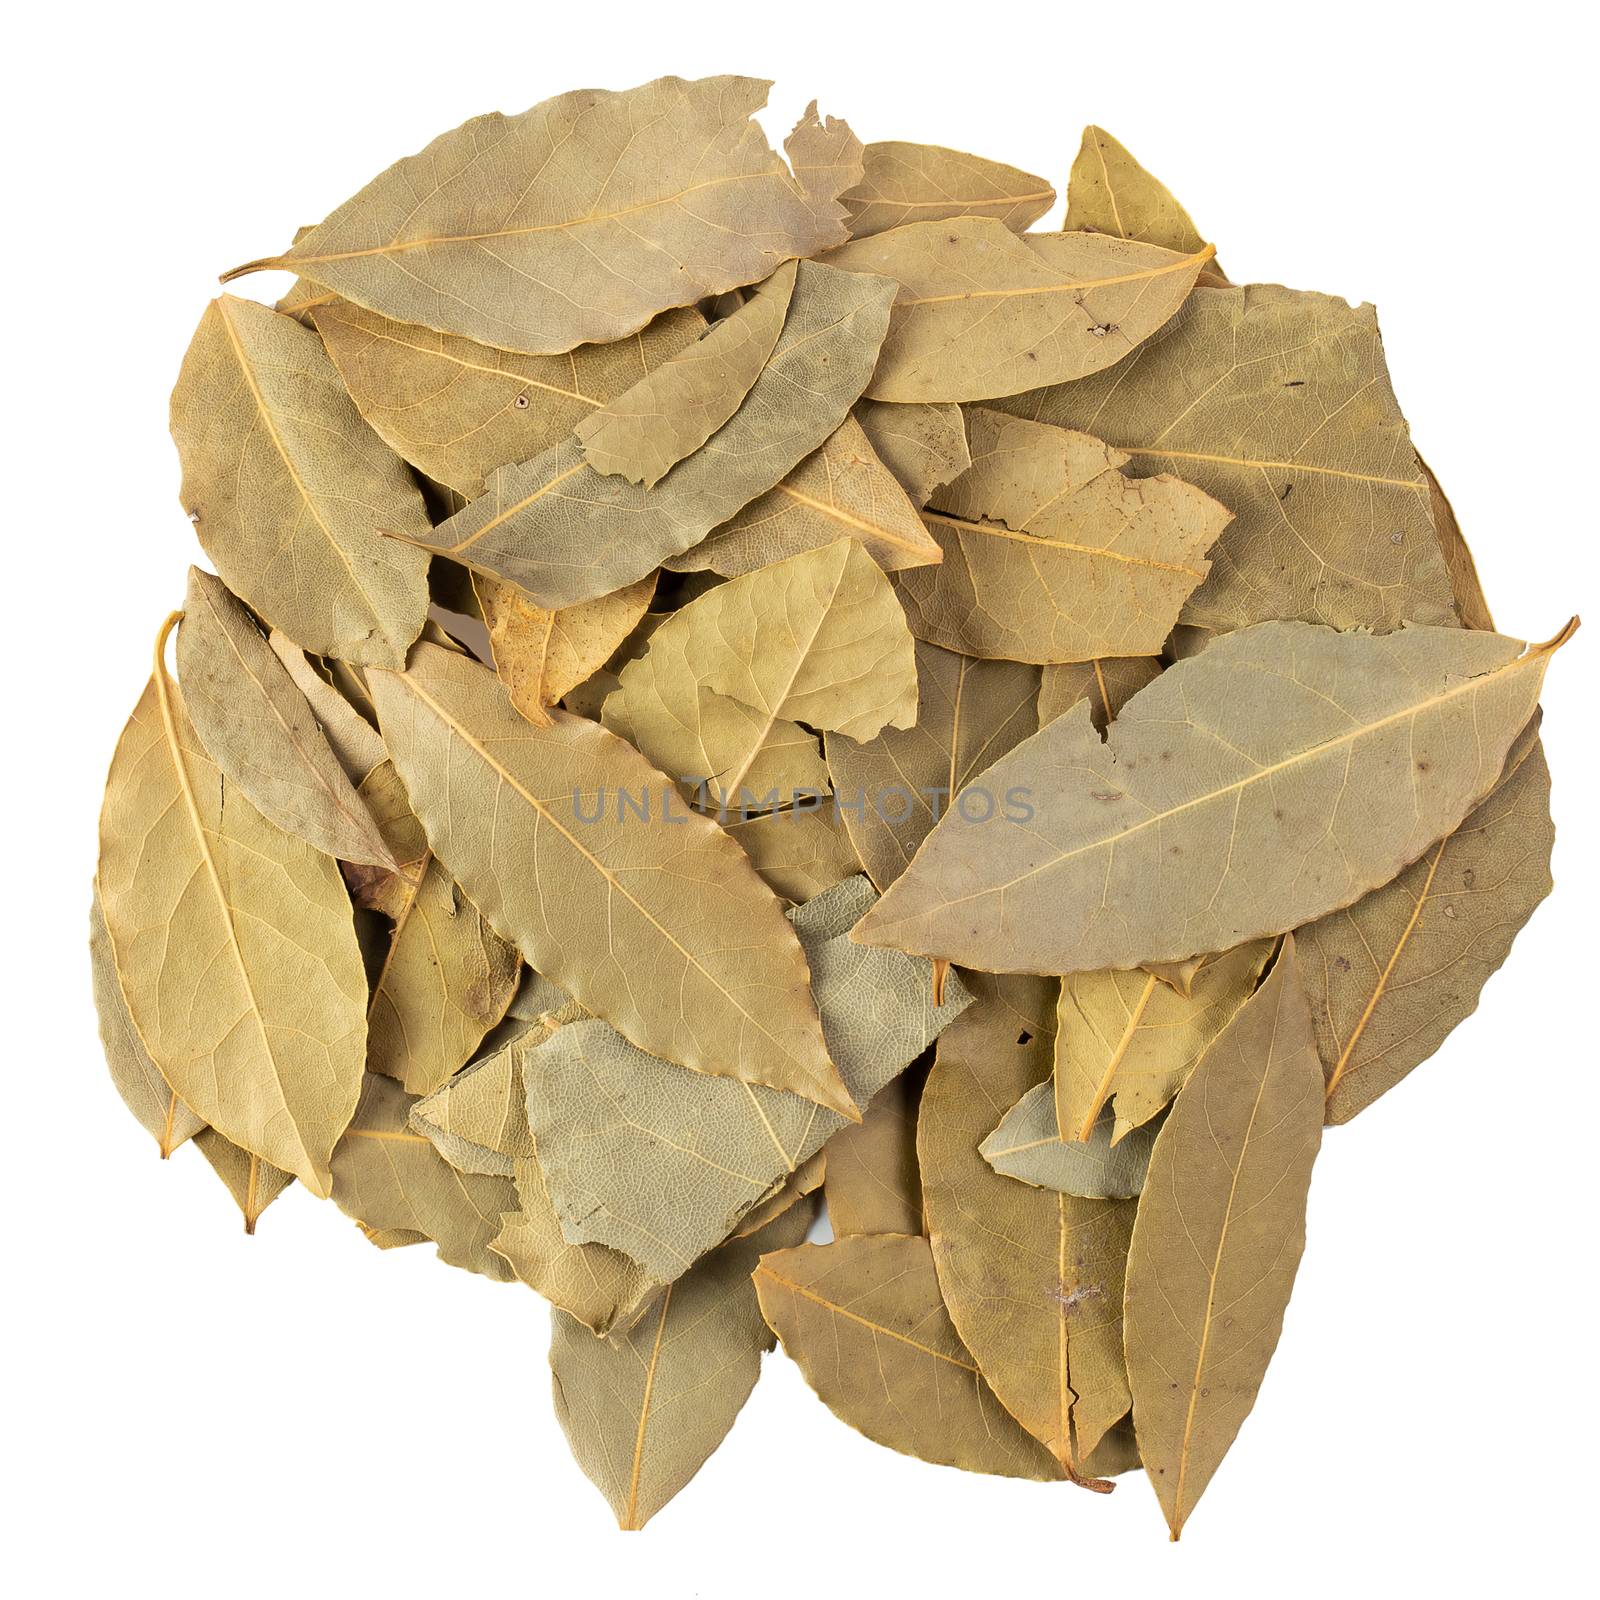 Dried bay leaves isolated on white background by kaiskynet